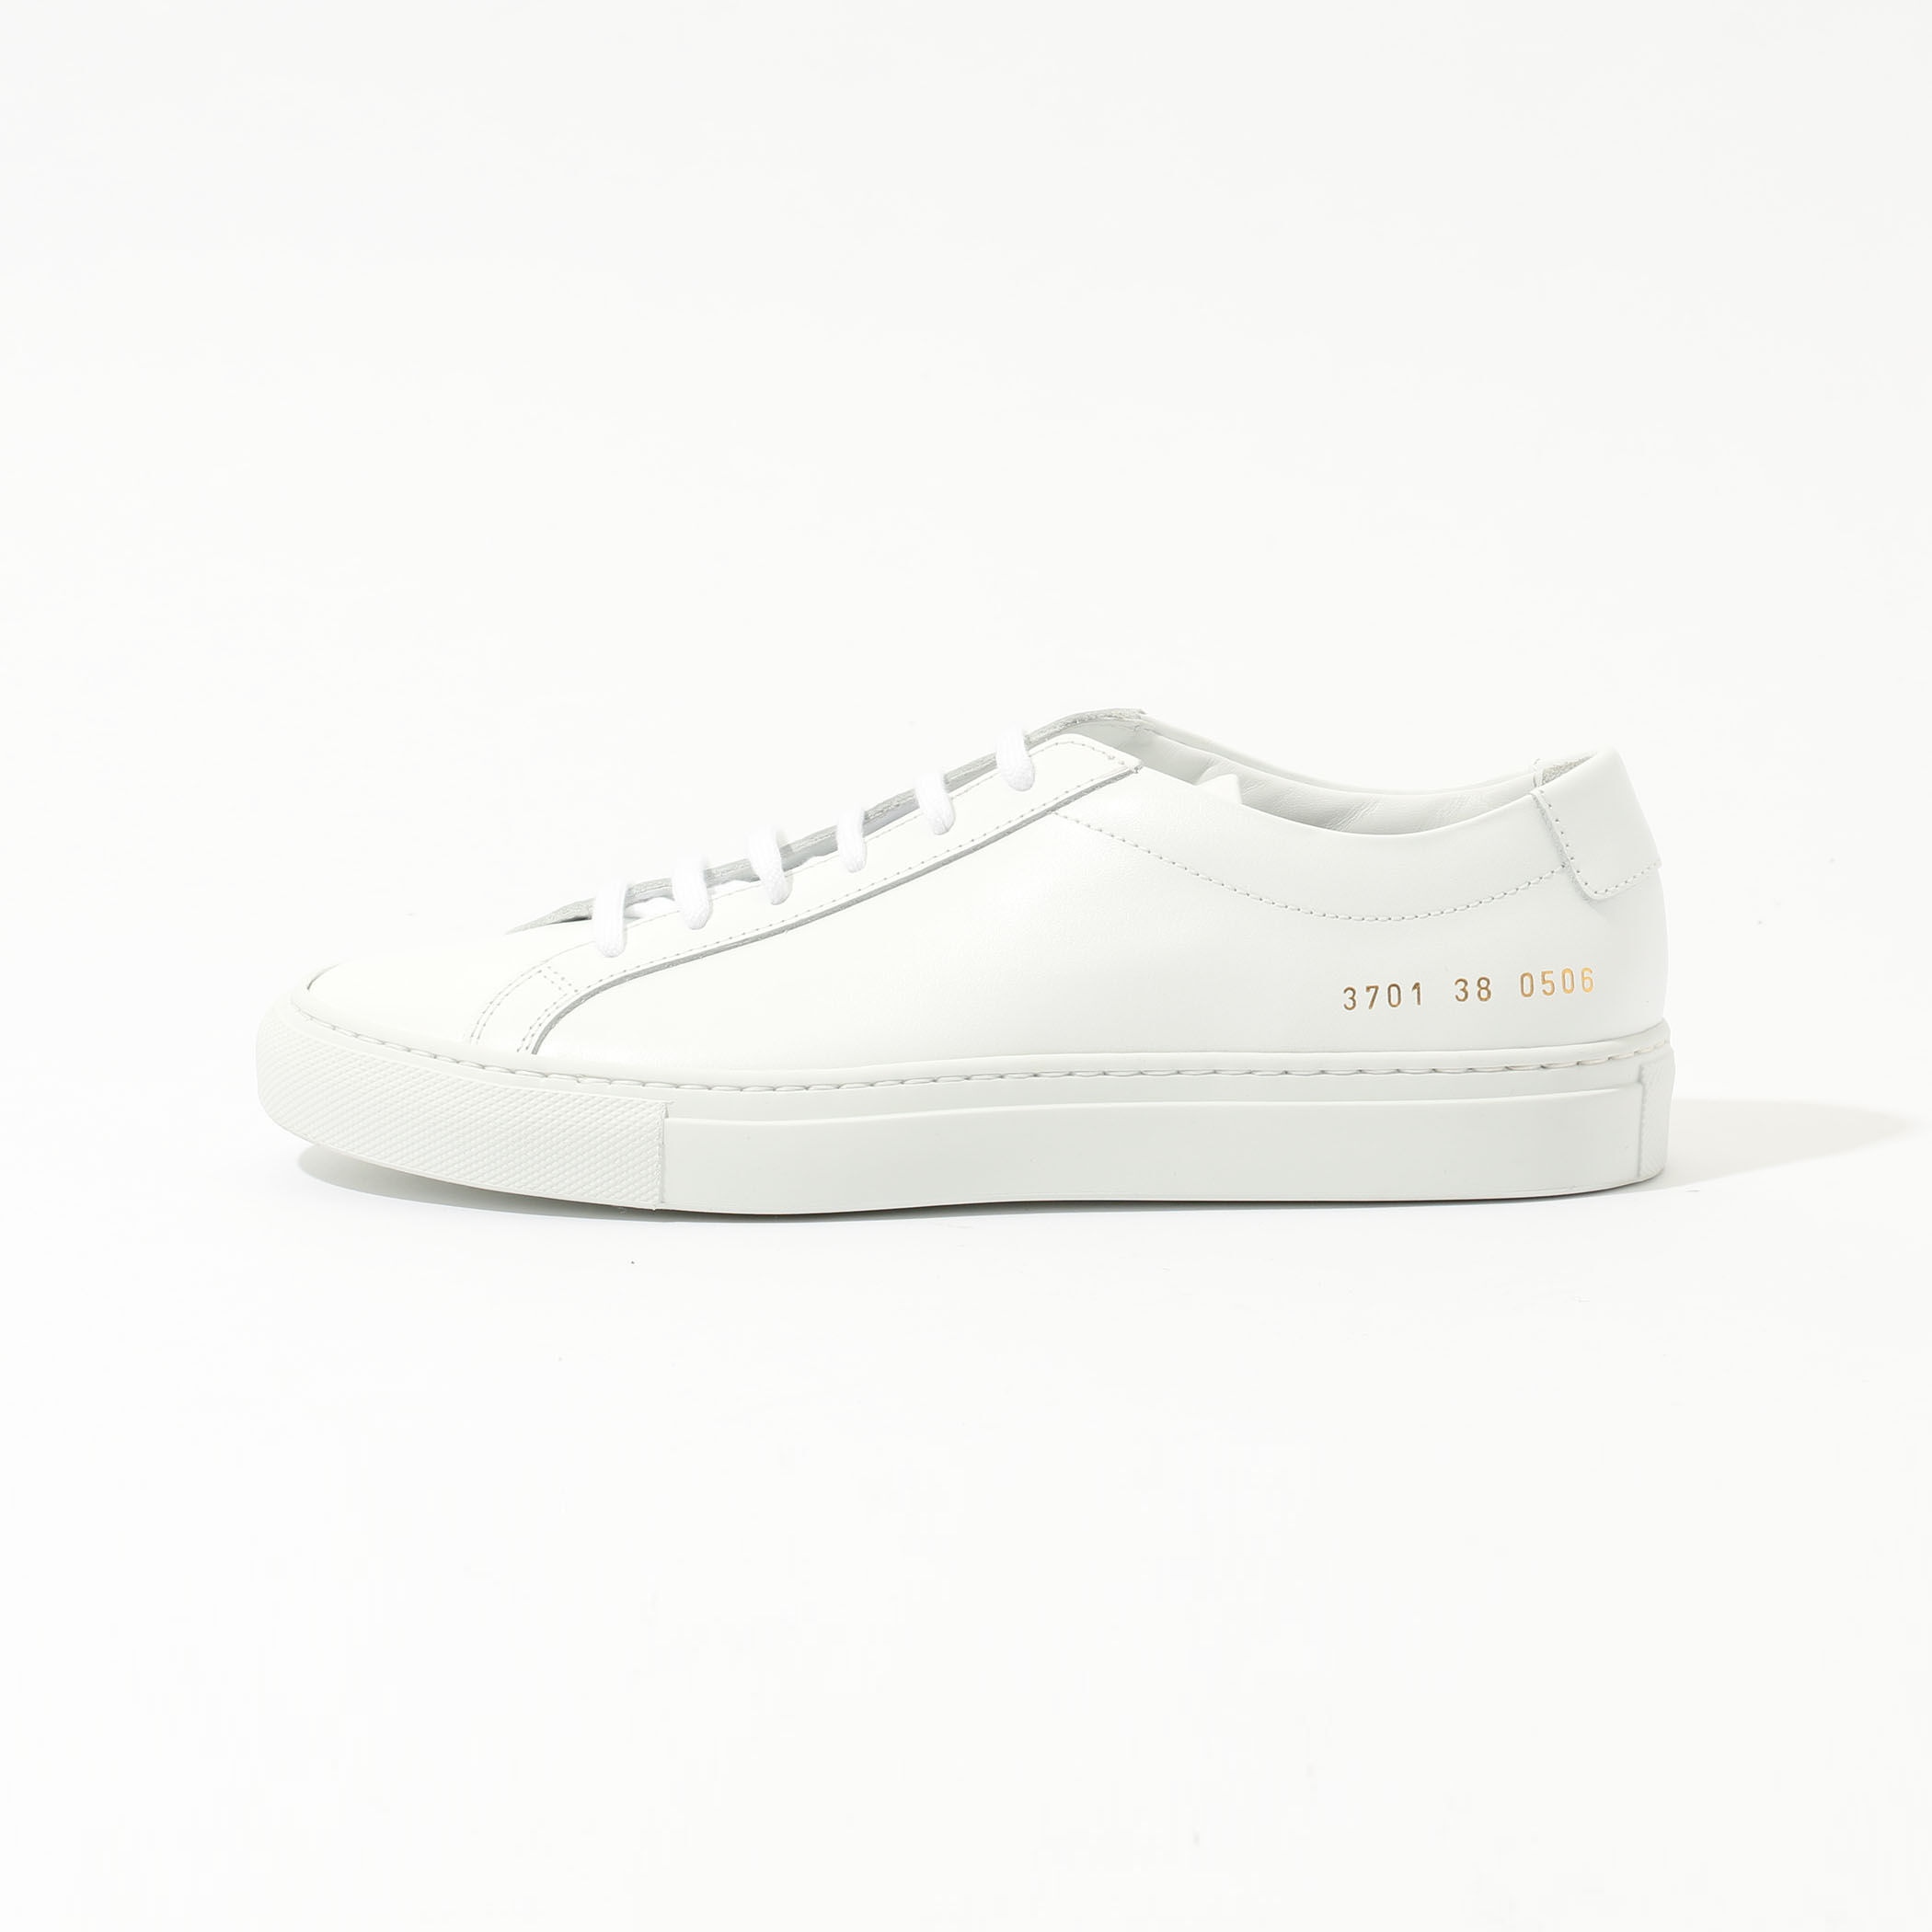 COMMON PROJECTS ACHILLES LOW ローカットスニーカー 